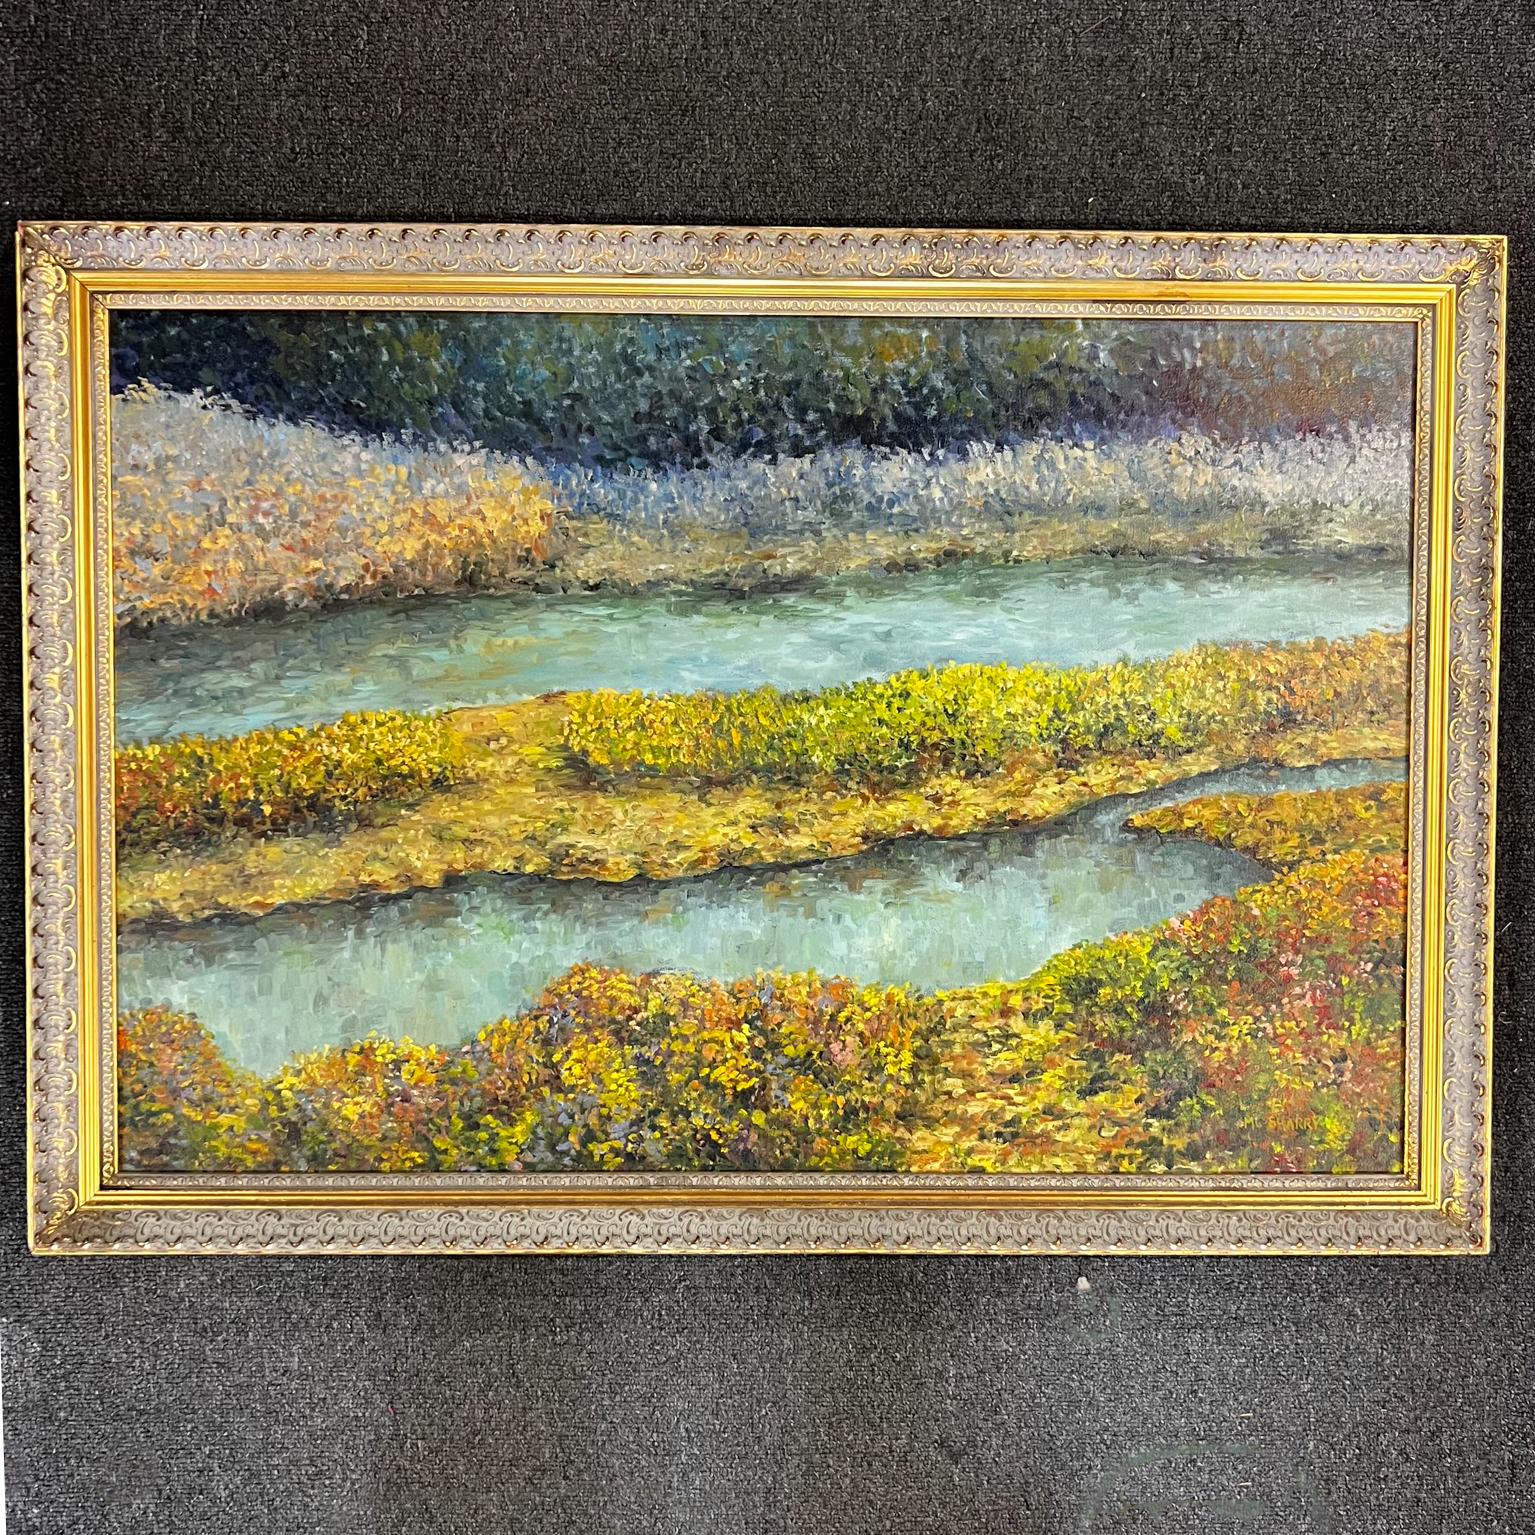 Art by Anne McSharry: Reflections
San Francisco CA
Oil on canvas impressionist landscape.
Signed and framed.
27.5 tall x 39.5 w x 1.75 d, art 35.5 w x 23.5 tall
Preowned original vintage condition
Refer to all images.